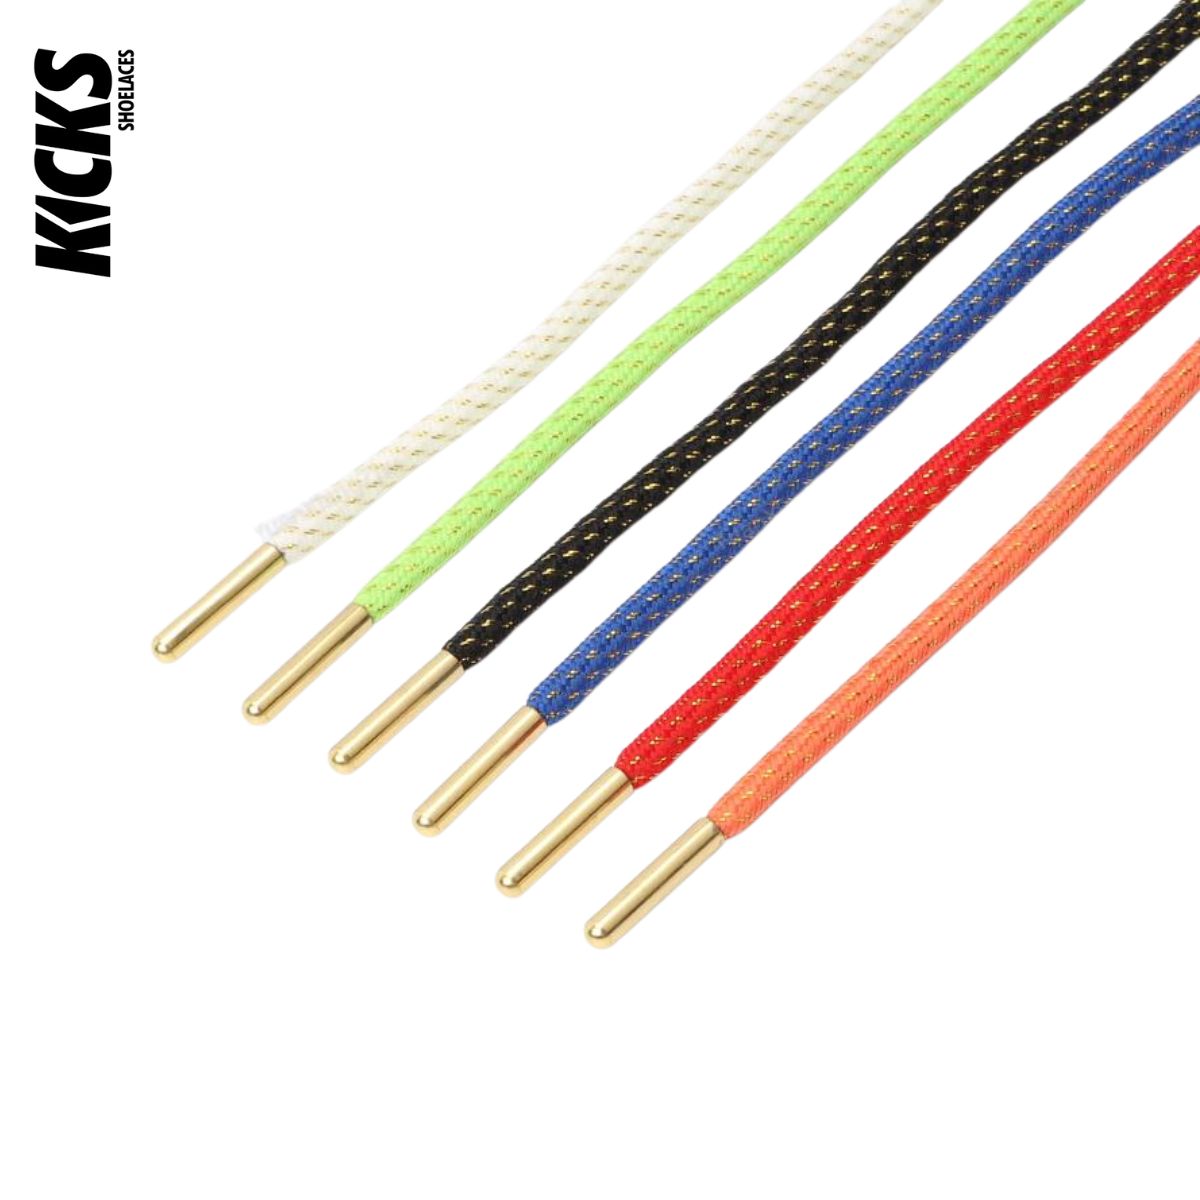 Round Shoelaces with Metal Aglets